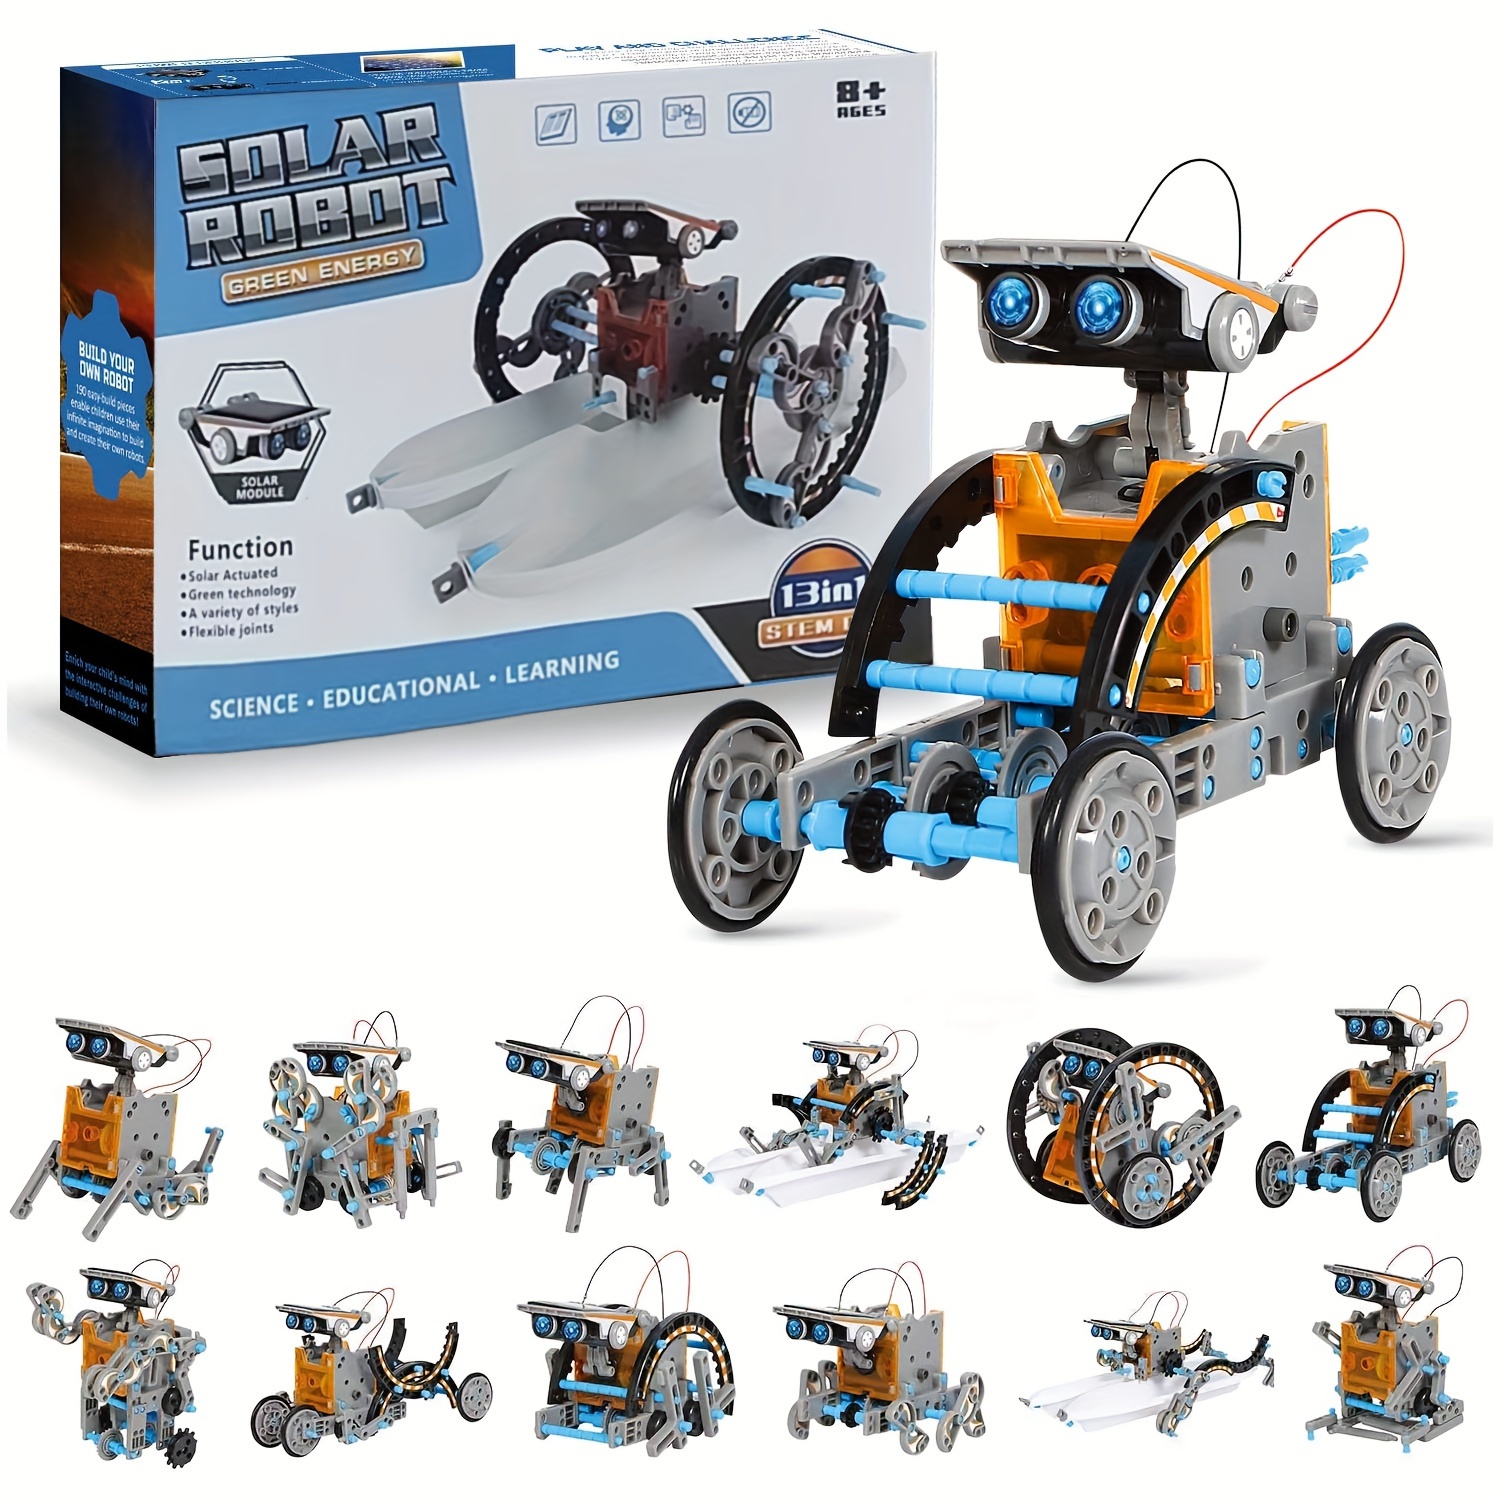 Stem Robotics Kit, 6 Set Electronic Science Experiments Projects for Kids, Boys Toys Ages 7 8 9 10 11 12 Years Old, Physics stimulated, DIY